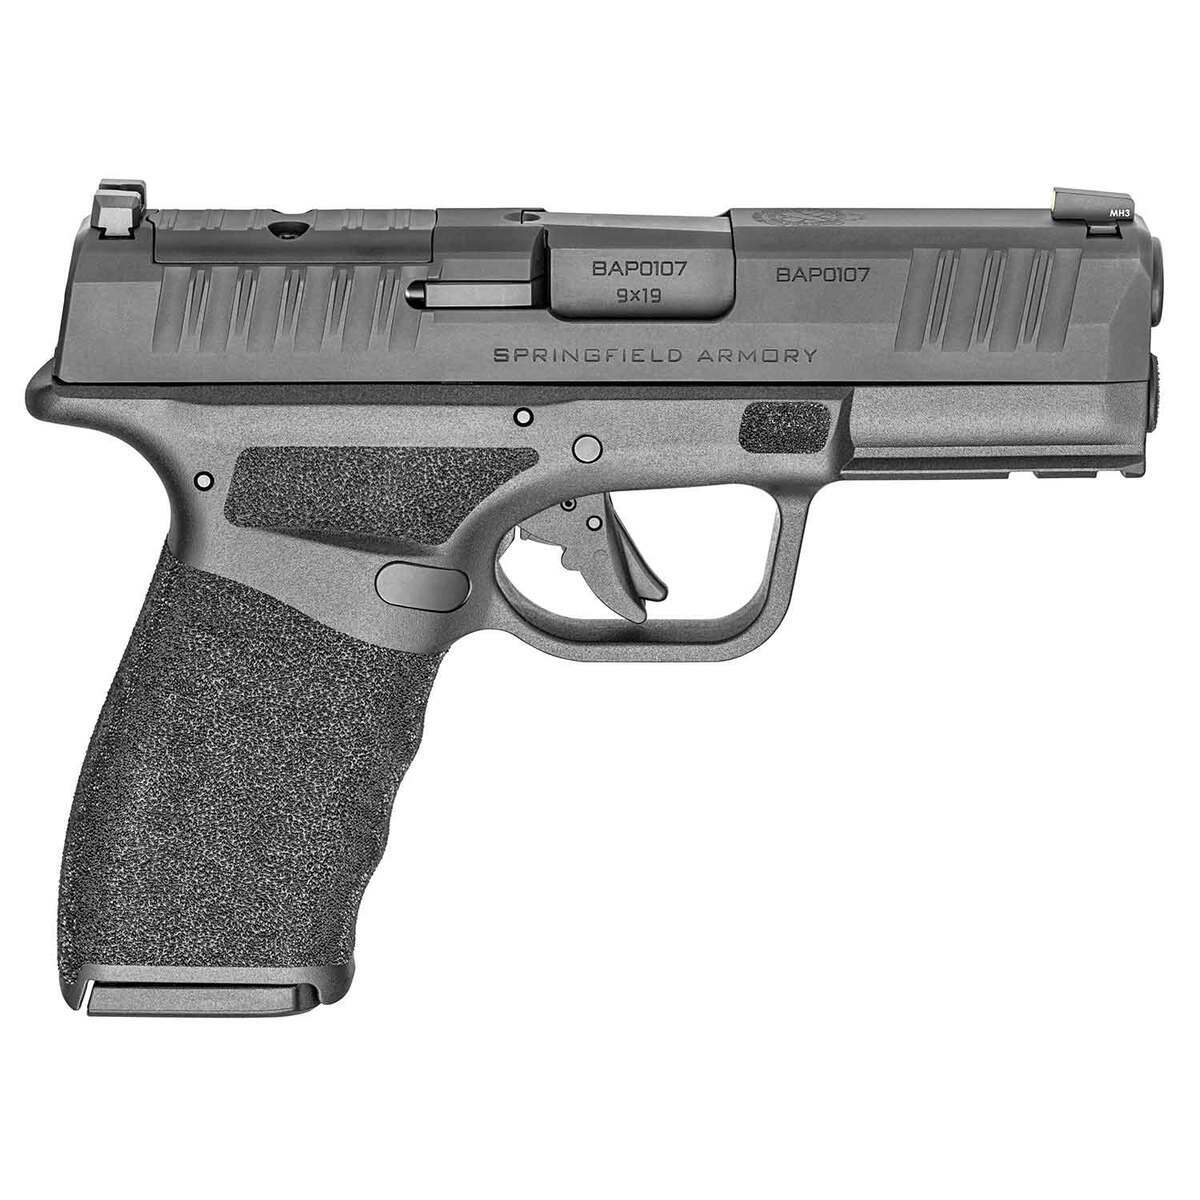 Between the Springfield Hellcat, Glock 26, and Sig P365, which